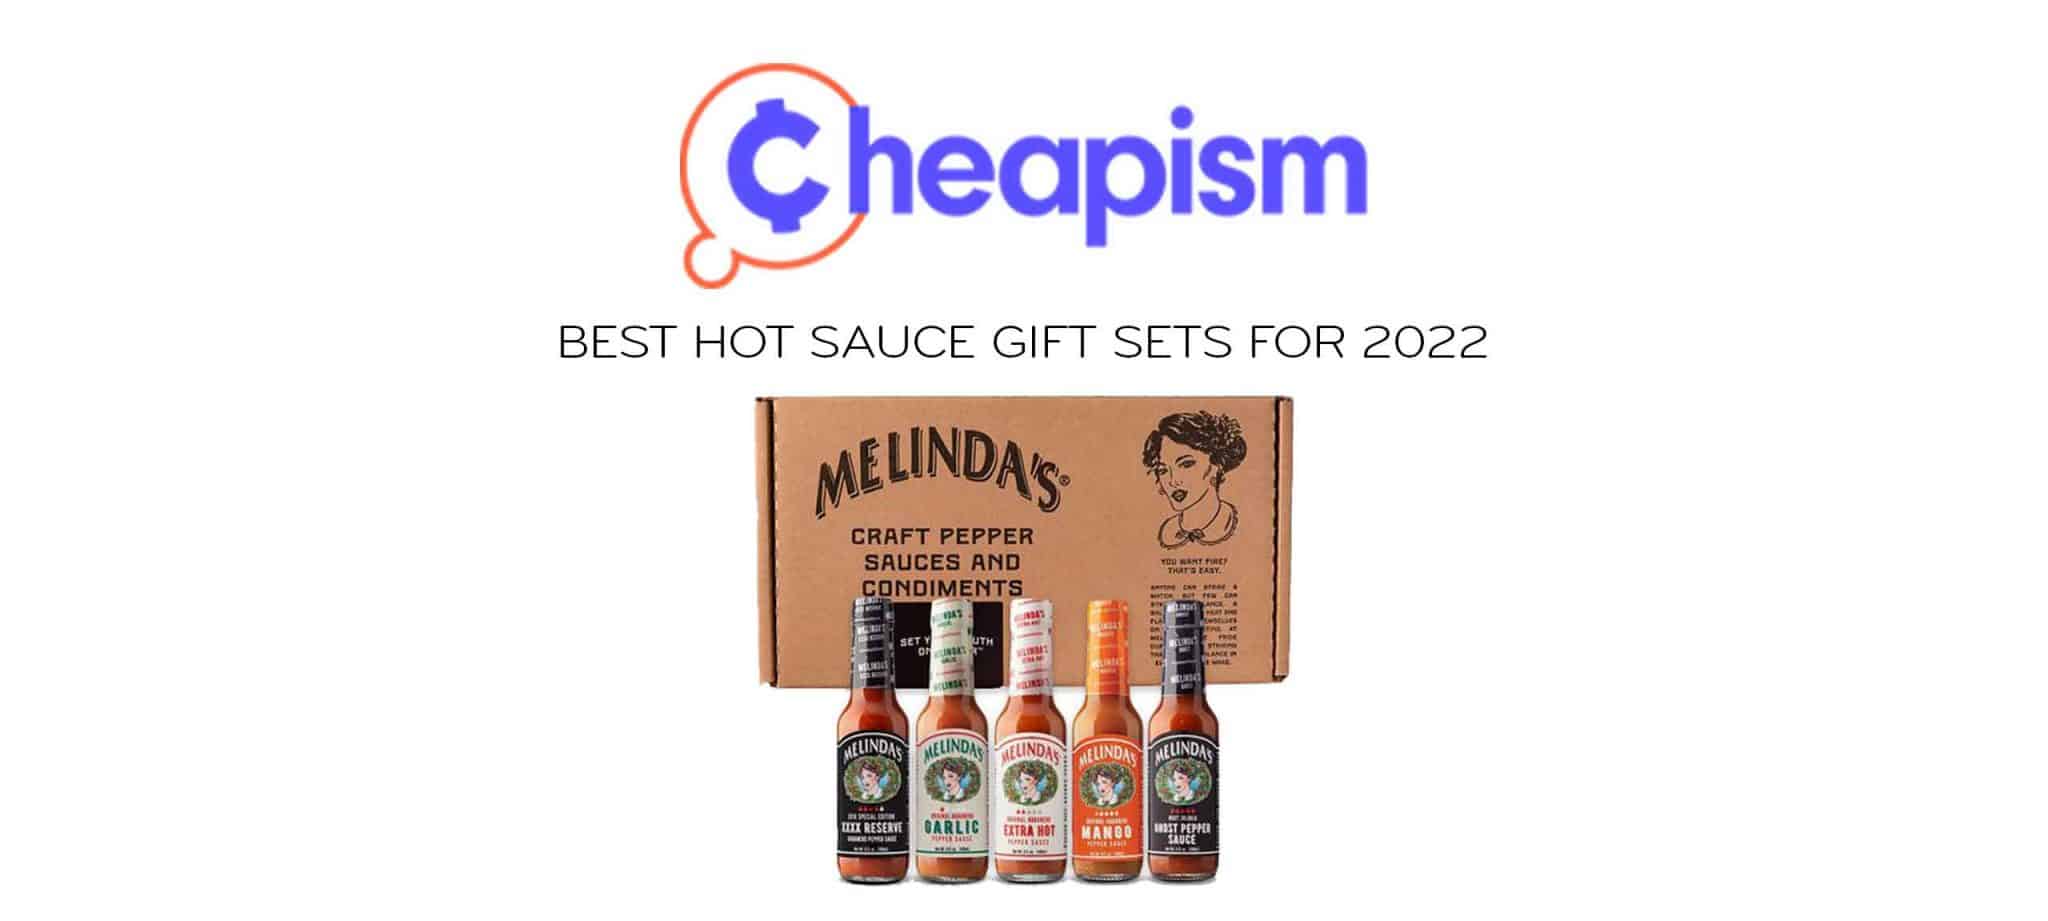 Best Hot Sauce Gift Sets for 2022 | Says Cheapism